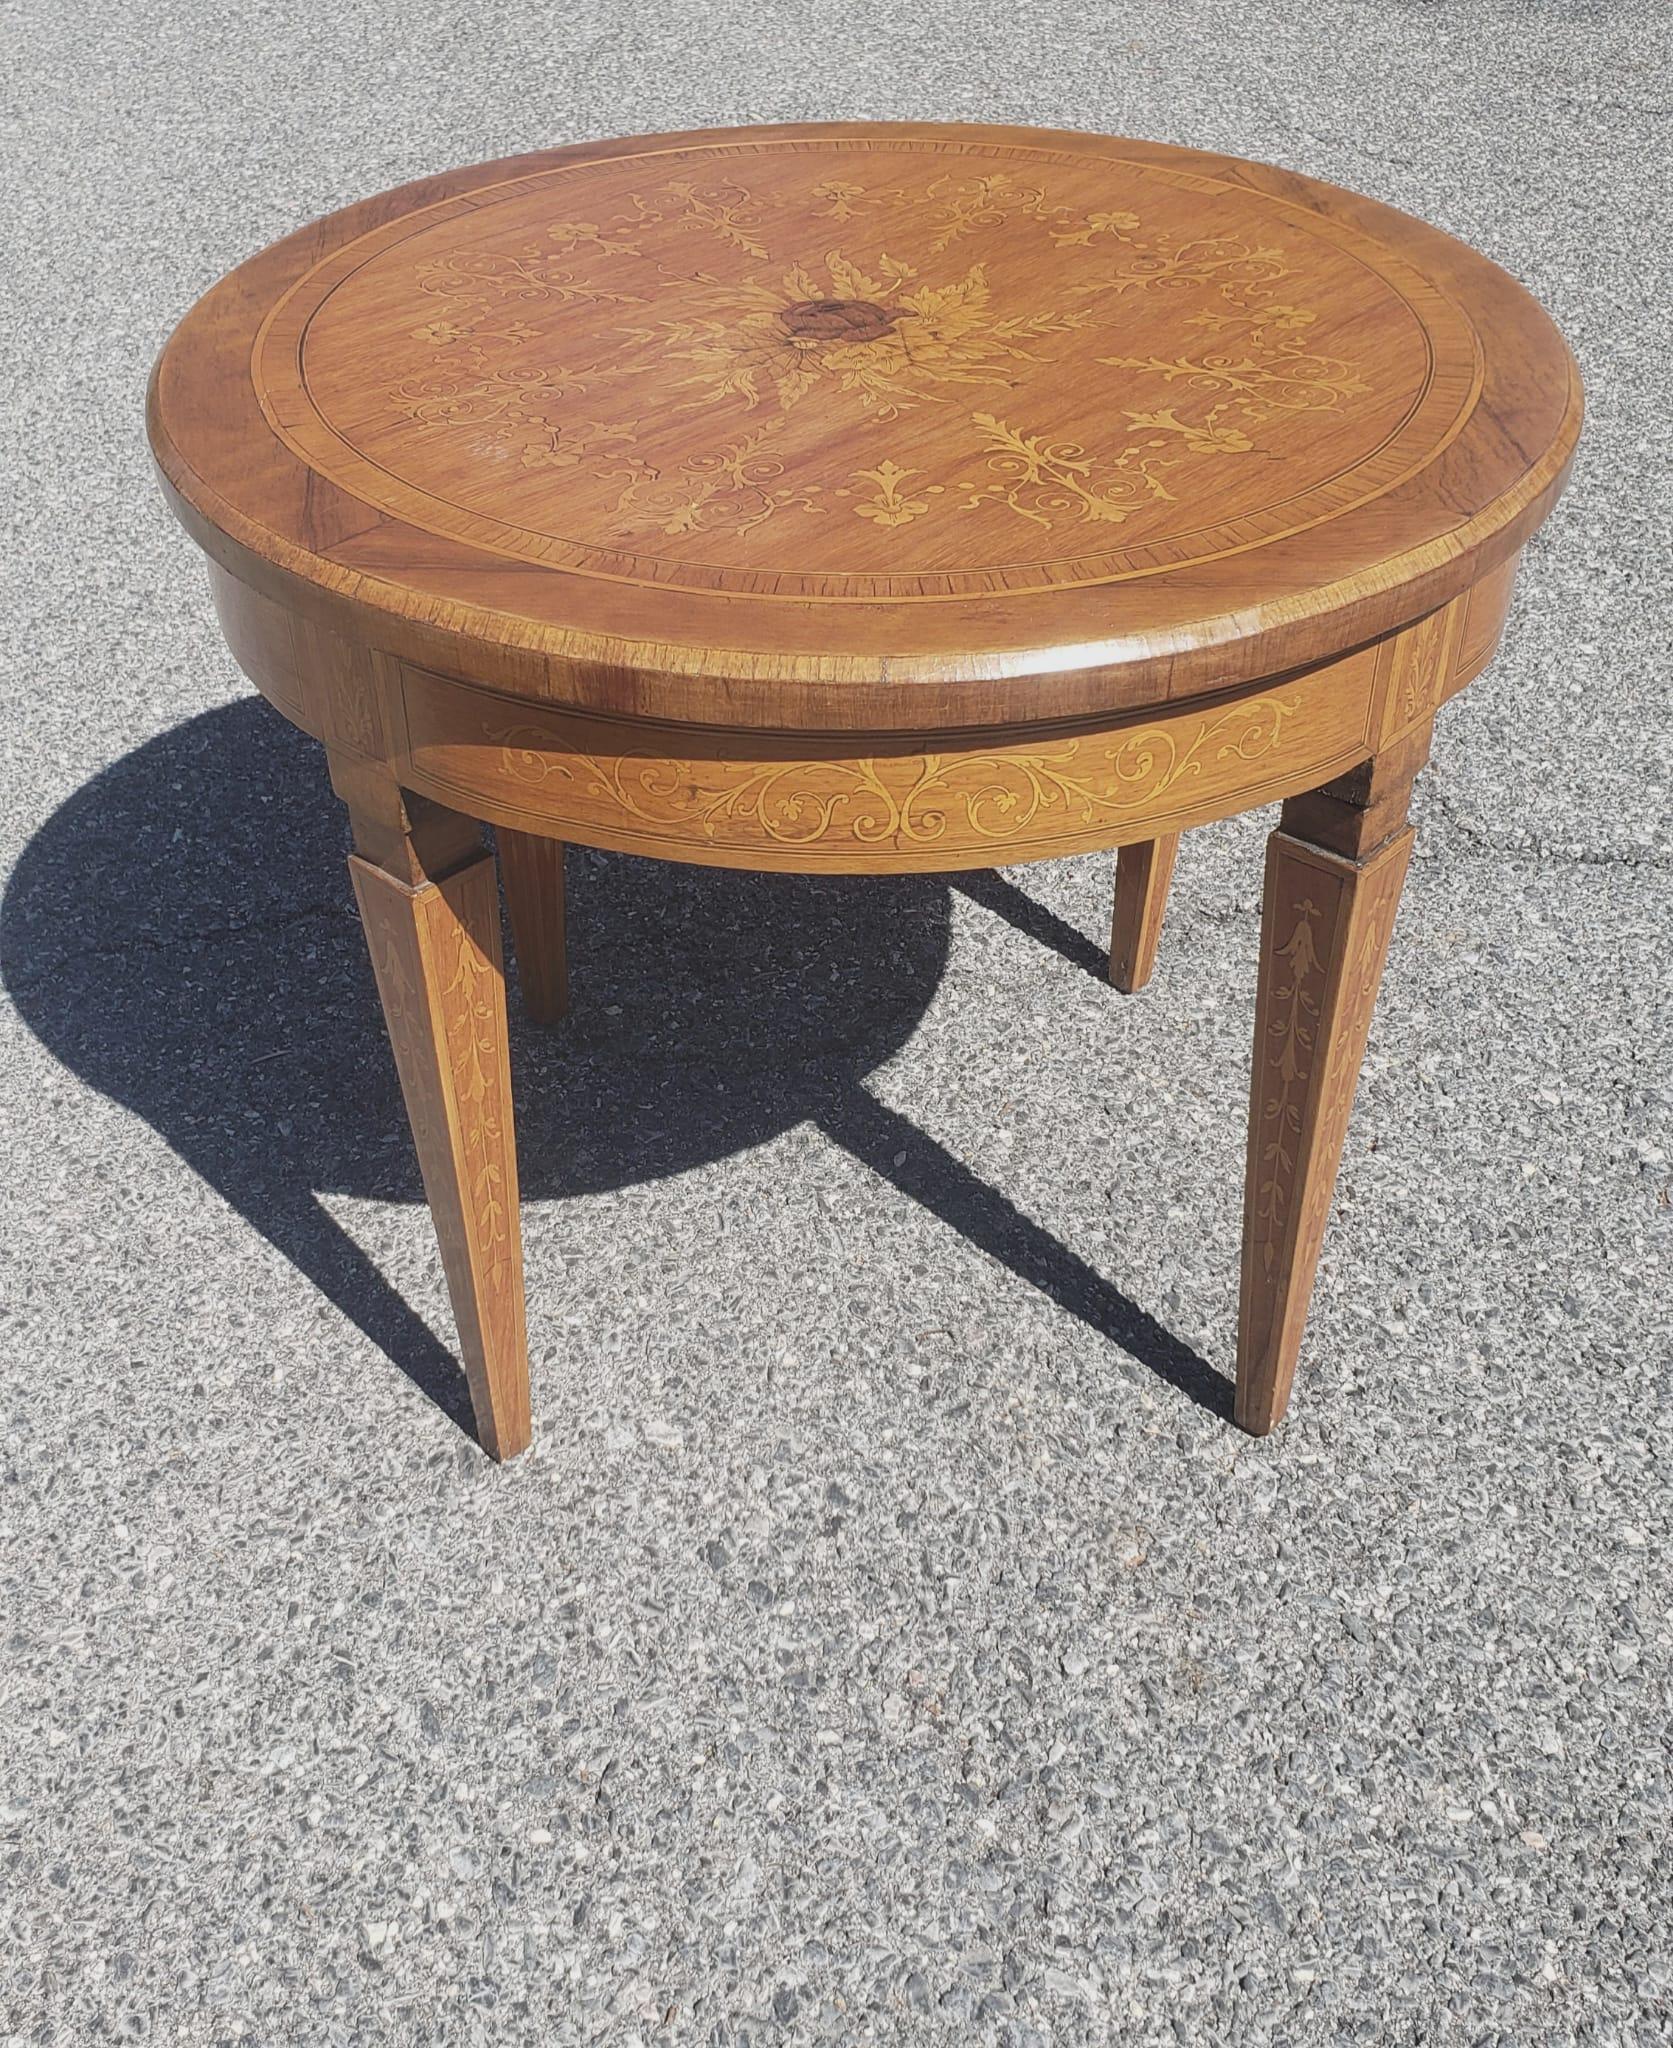 Early 20th Century Dutch Colonial Style Marquetry Fruitwood Gueridon Table In Good Condition For Sale In Germantown, MD